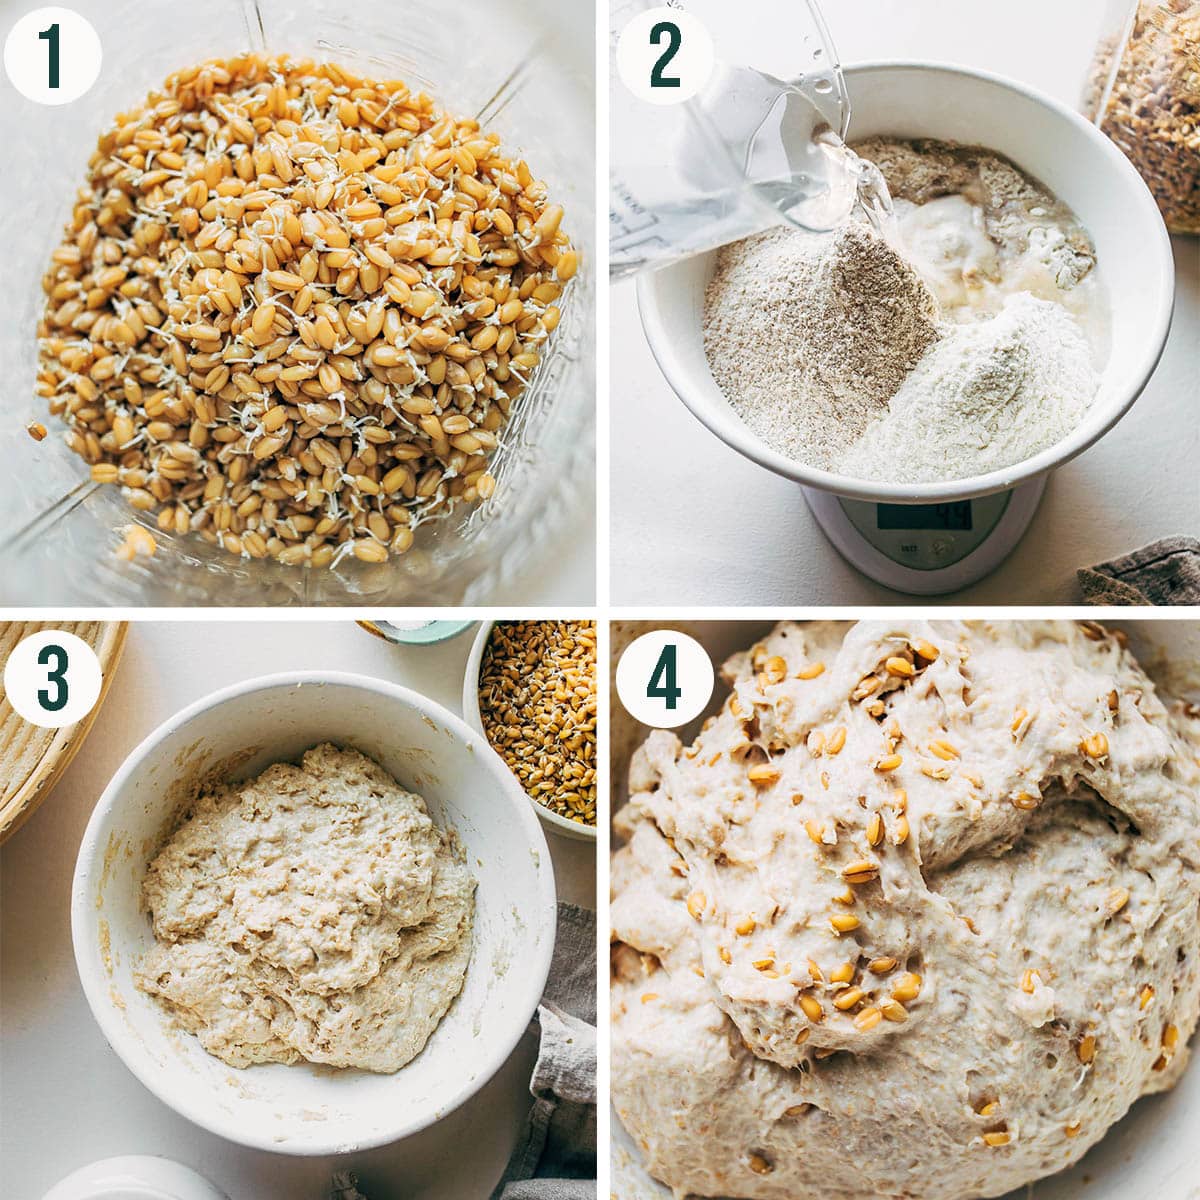 Sprouted bread steps 1 to 4, sprouted grains, mixing the dough, and after folding.